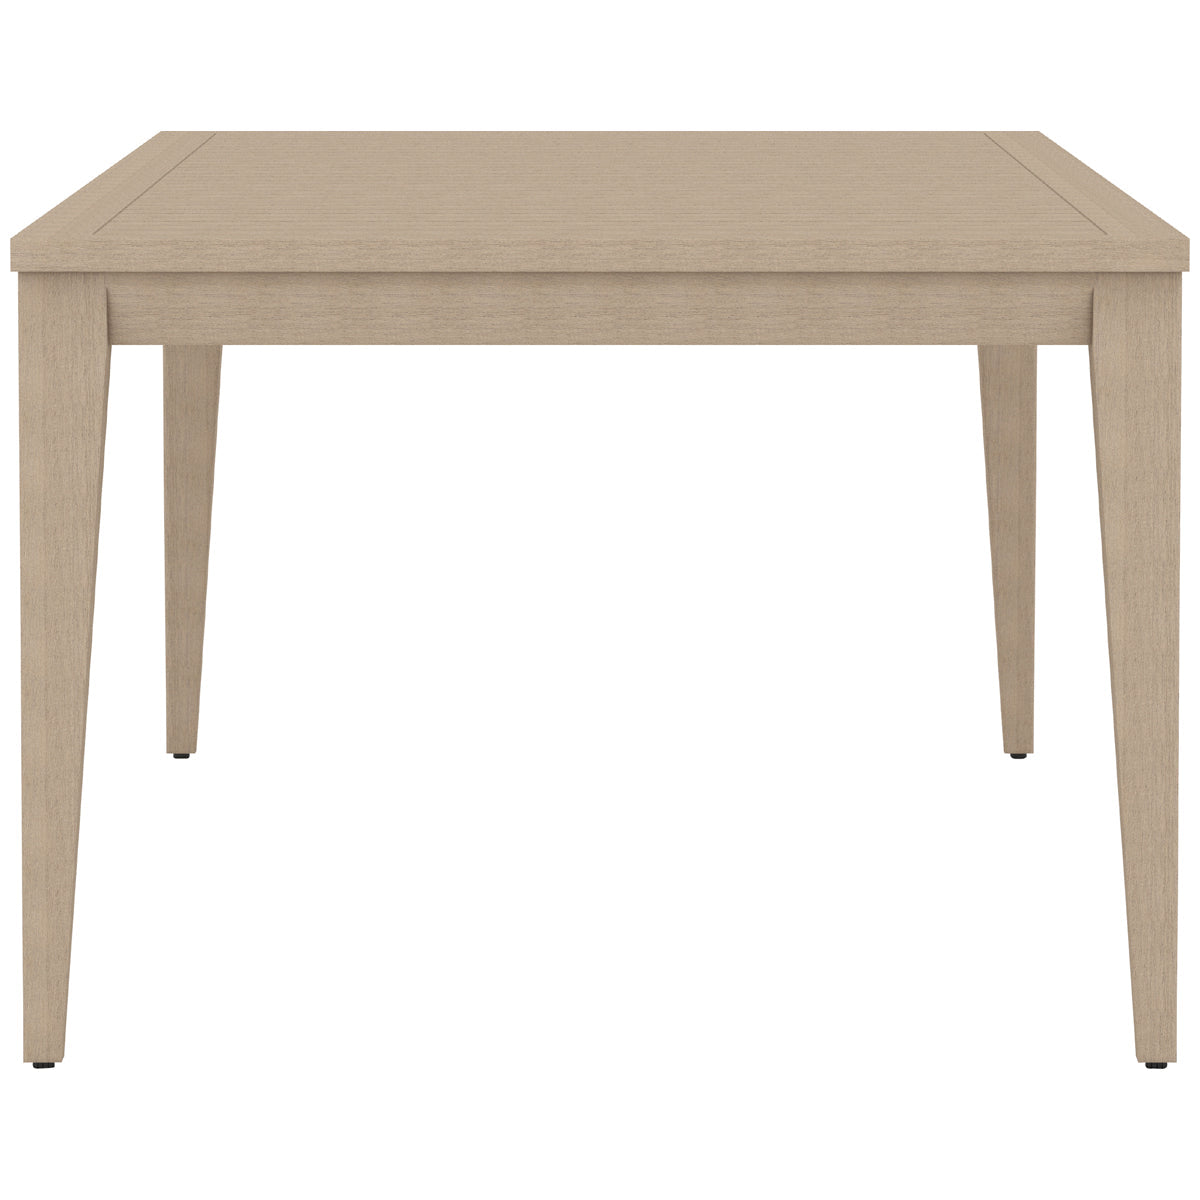 Four Hands Solano Sherwood 94-Inch Outdoor Dining Table